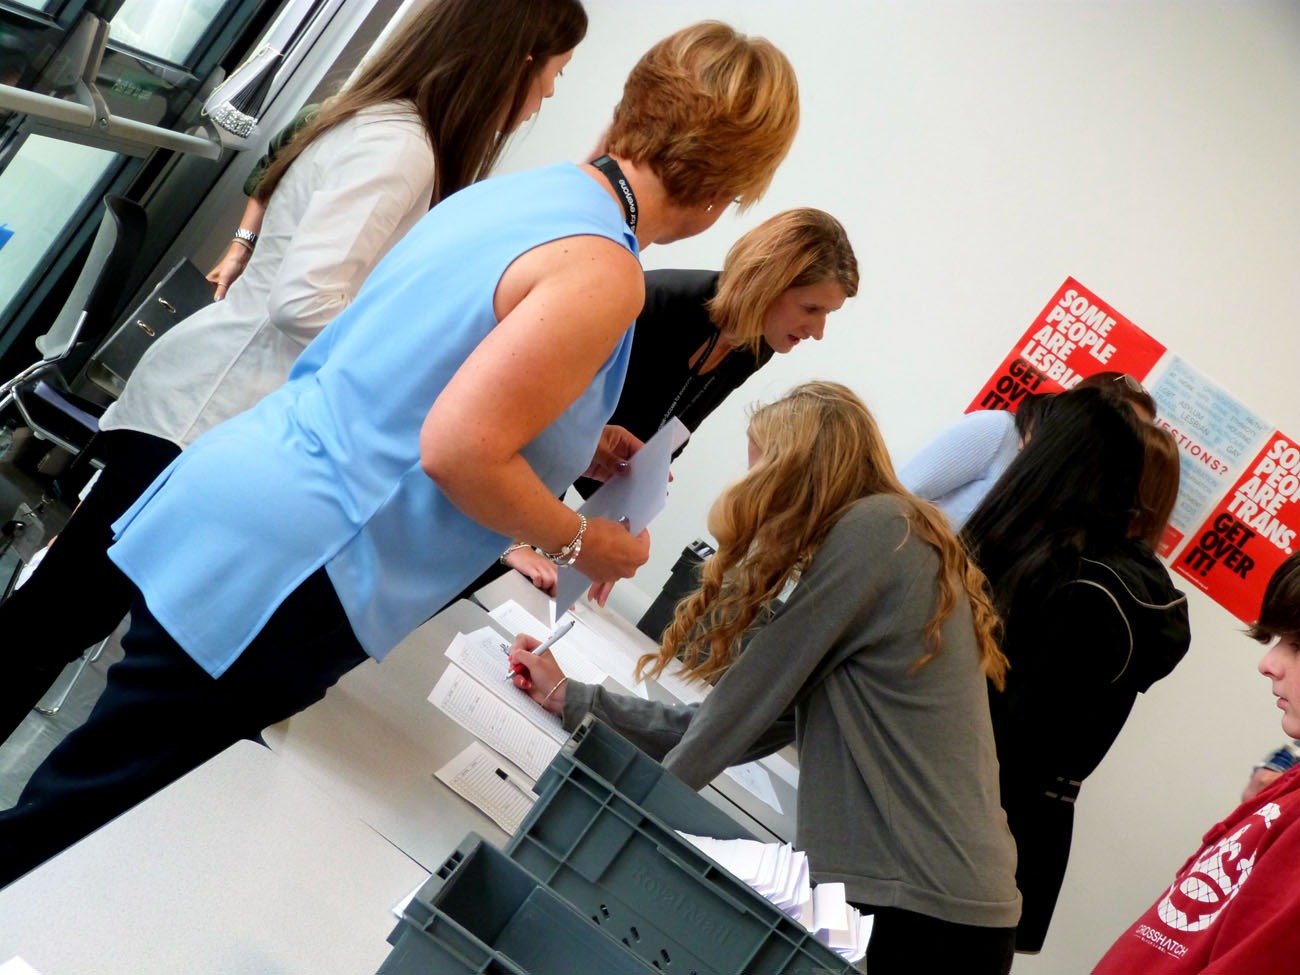 Nervousness turned to delight as students collected their GCSE results at Rossett School